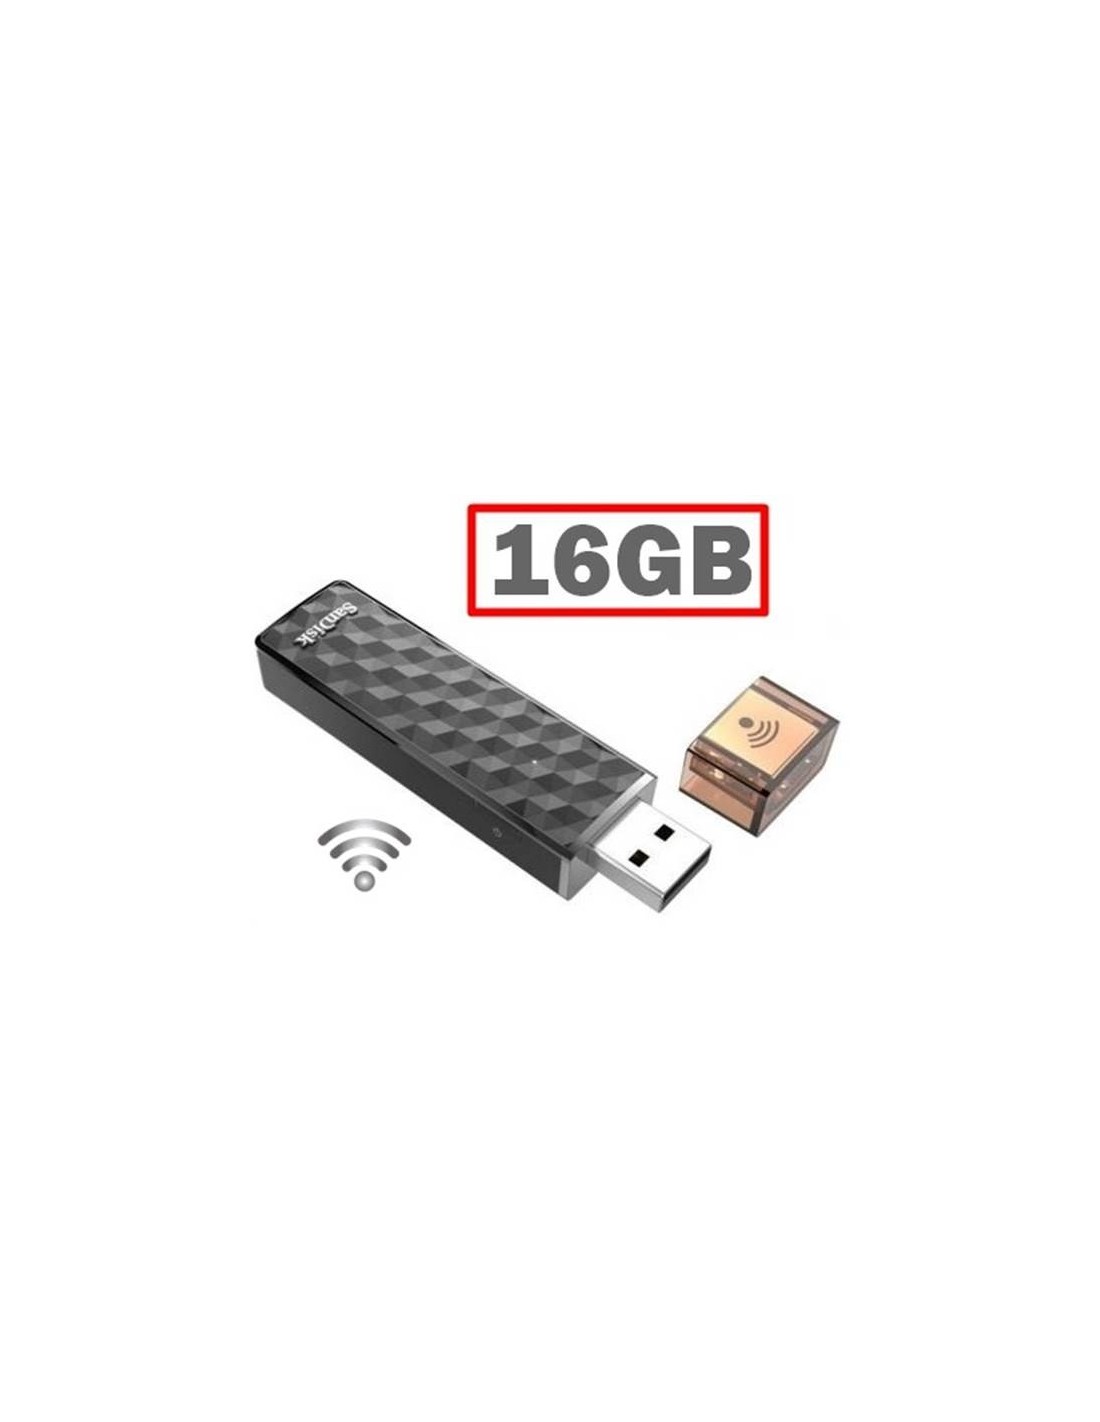 Sandisk : Pendrive Connect Wireless Stick 16GB (blíster)